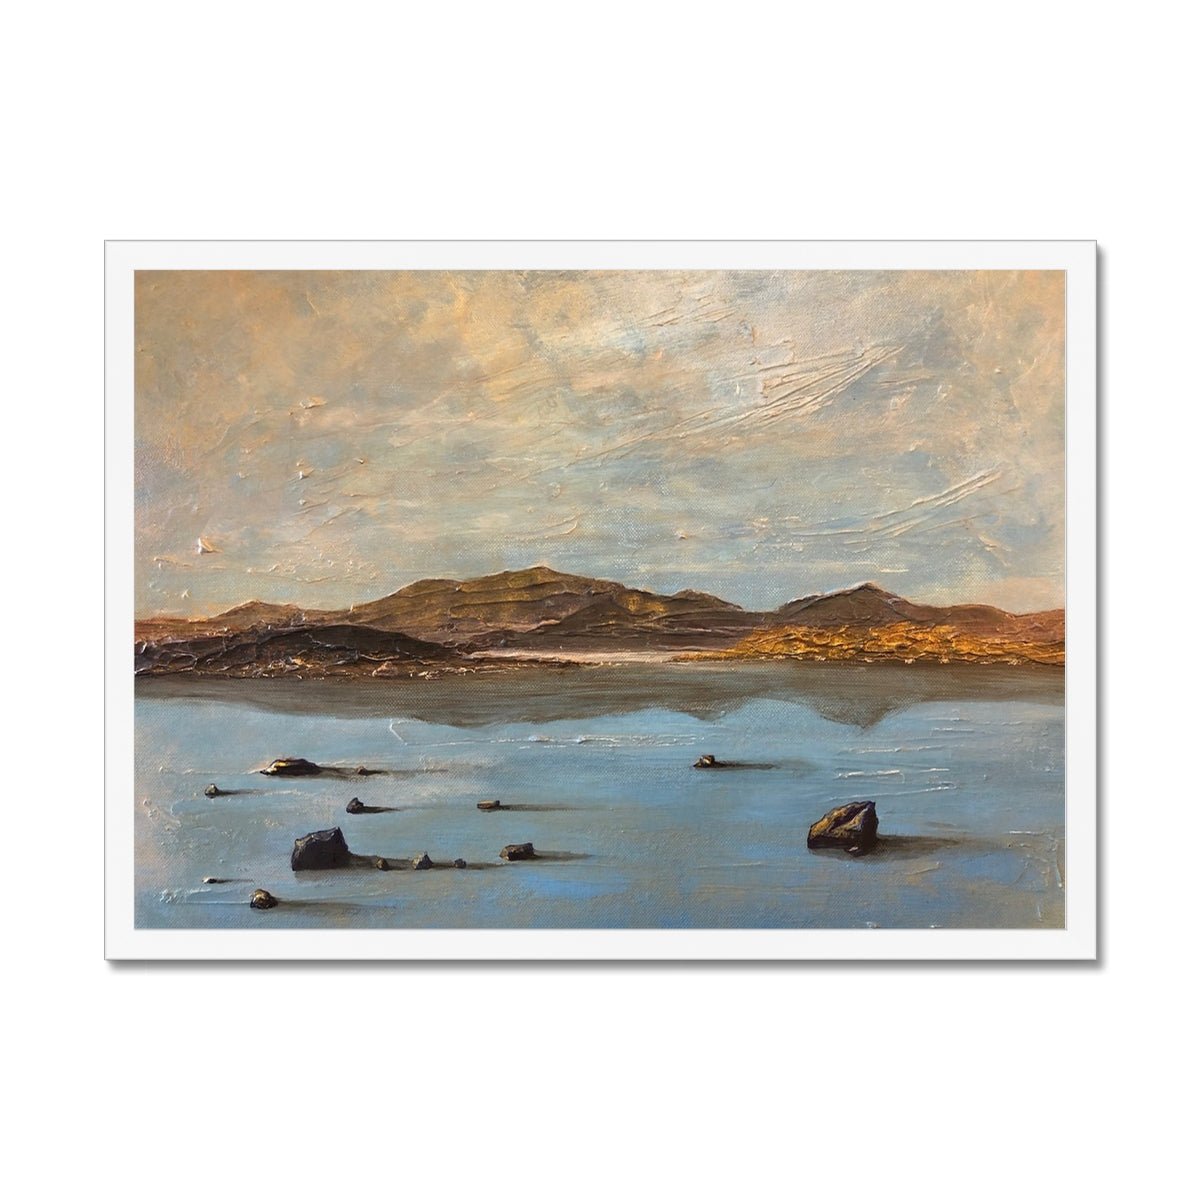 Loch Druidibeg South Uist Painting | Framed Prints From Scotland-Framed Prints-Scottish Lochs Art Gallery-A2 Landscape-White Frame-Paintings, Prints, Homeware, Art Gifts From Scotland By Scottish Artist Kevin Hunter